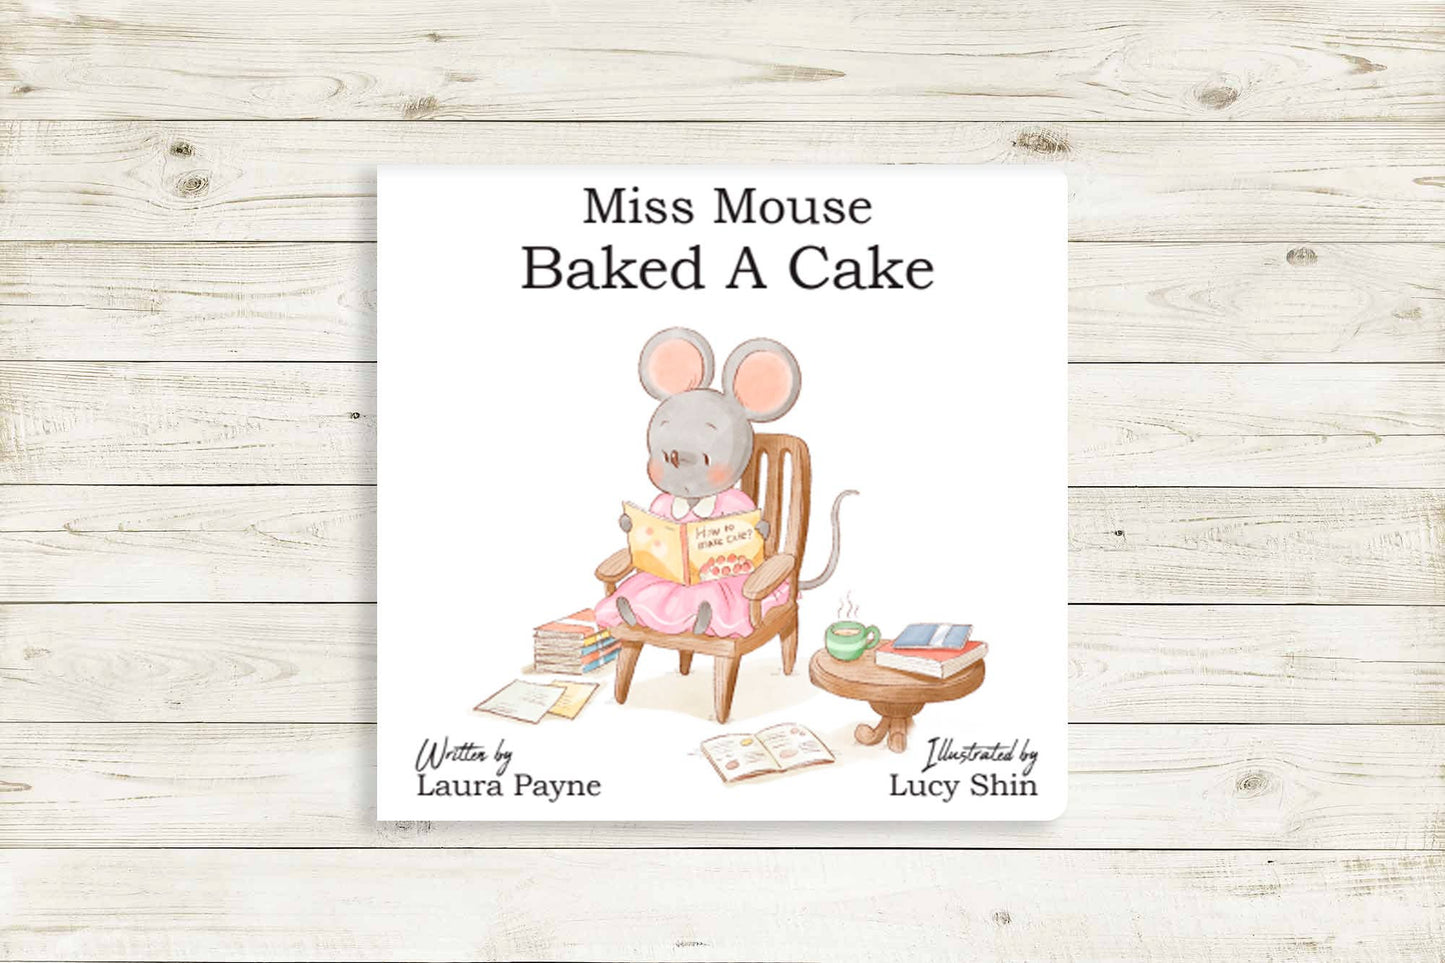 Miss Mouse Baked A Cake